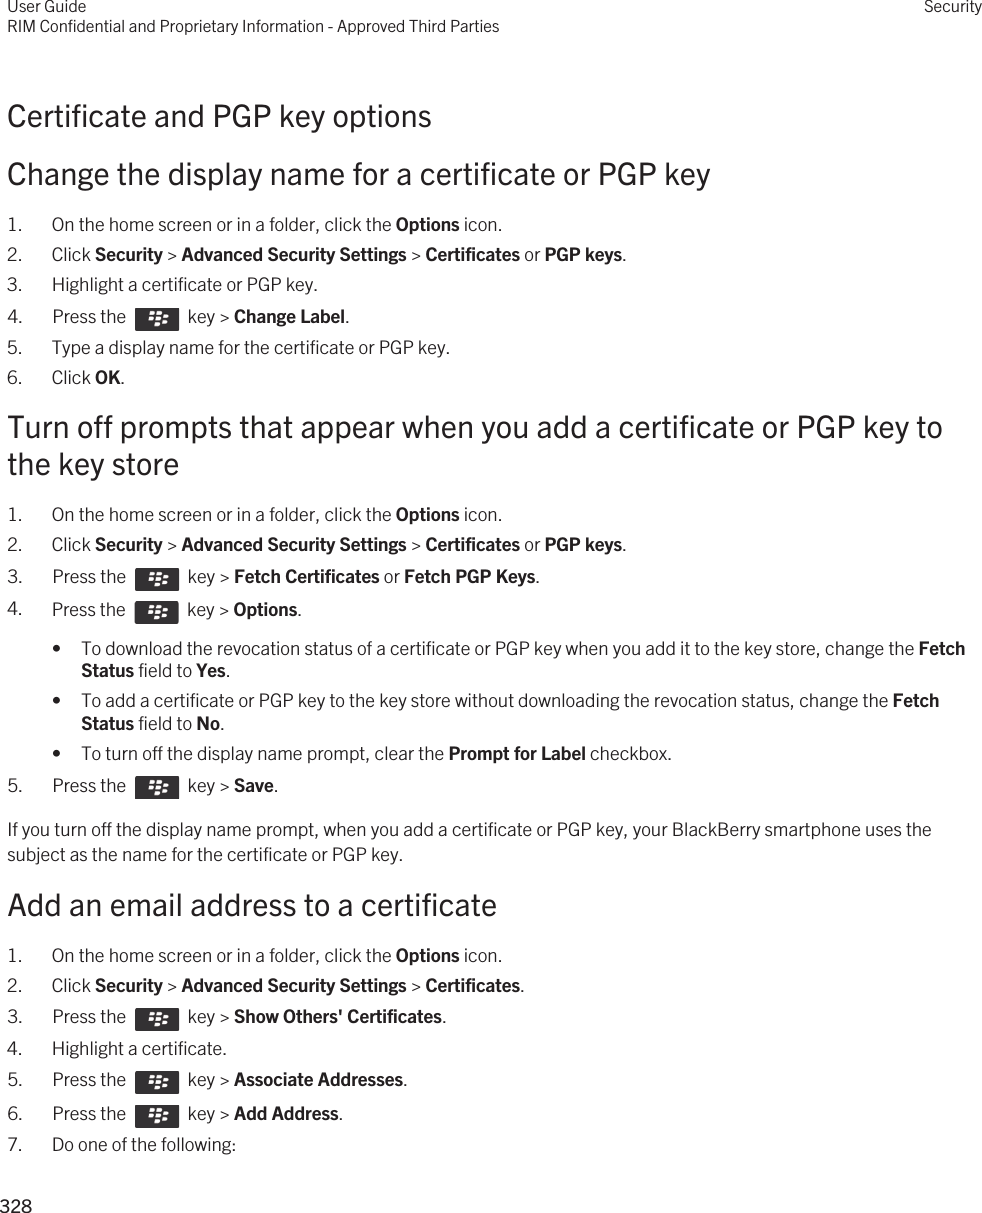 Certificate and PGP key optionsChange the display name for a certificate or PGP key1. On the home screen or in a folder, click the Options icon.2. Click Security &gt; Advanced Security Settings &gt; Certificates or PGP keys.3. Highlight a certificate or PGP key.4.  Press the    key &gt; Change Label. 5. Type a display name for the certificate or PGP key.6. Click OK.Turn off prompts that appear when you add a certificate or PGP key to the key store1. On the home screen or in a folder, click the Options icon.2. Click Security &gt; Advanced Security Settings &gt; Certificates or PGP keys.3.  Press the    key &gt; Fetch Certificates or Fetch PGP Keys. 4. Press the    key &gt; Options. • To download the revocation status of a certificate or PGP key when you add it to the key store, change the Fetch Status field to Yes.• To add a certificate or PGP key to the key store without downloading the revocation status, change the Fetch Status field to No.• To turn off the display name prompt, clear the Prompt for Label checkbox.5.  Press the    key &gt; Save. If you turn off the display name prompt, when you add a certificate or PGP key, your BlackBerry smartphone uses the subject as the name for the certificate or PGP key.Add an email address to a certificate1. On the home screen or in a folder, click the Options icon.2. Click Security &gt; Advanced Security Settings &gt; Certificates.3.  Press the    key &gt; Show Others&apos; Certificates.4. Highlight a certificate.5.  Press the    key &gt; Associate Addresses. 6.  Press the    key &gt; Add Address. 7. Do one of the following:User GuideRIM Confidential and Proprietary Information - Approved Third PartiesSecurity328 